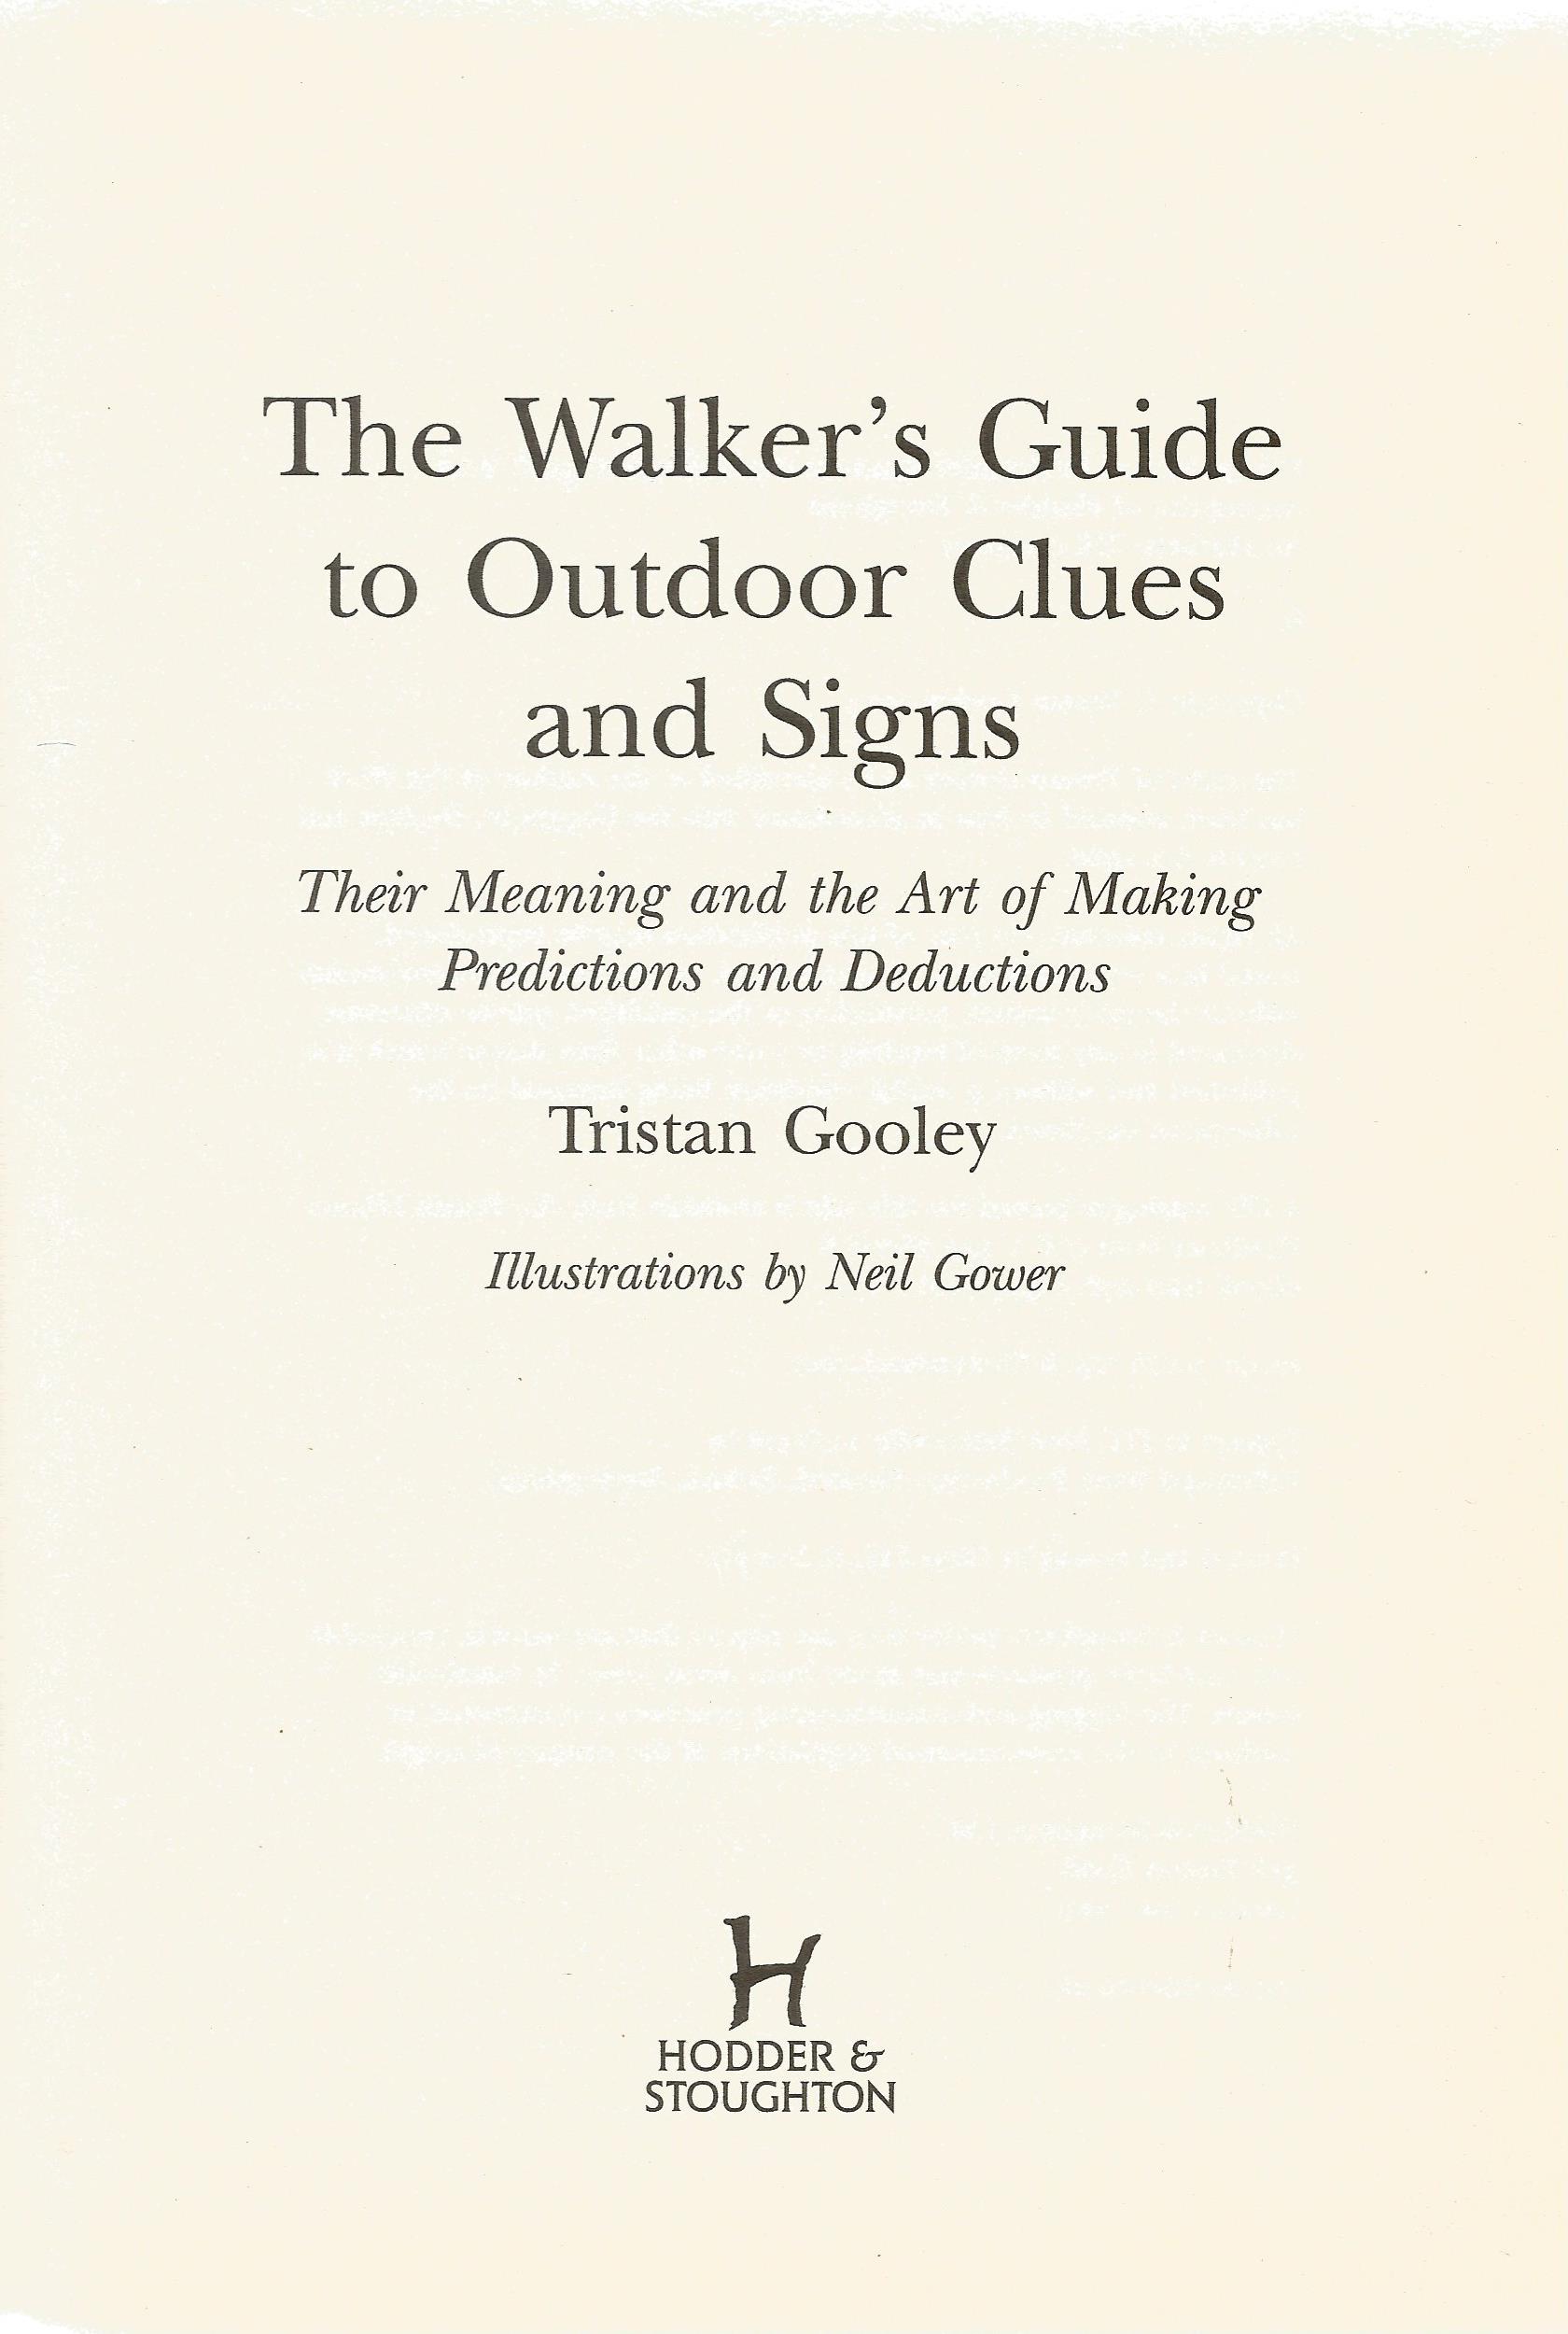 Tristan Gooley hardback book The Walker's Guide to Outdoor Clues & Signs 2014 published by - Image 2 of 2